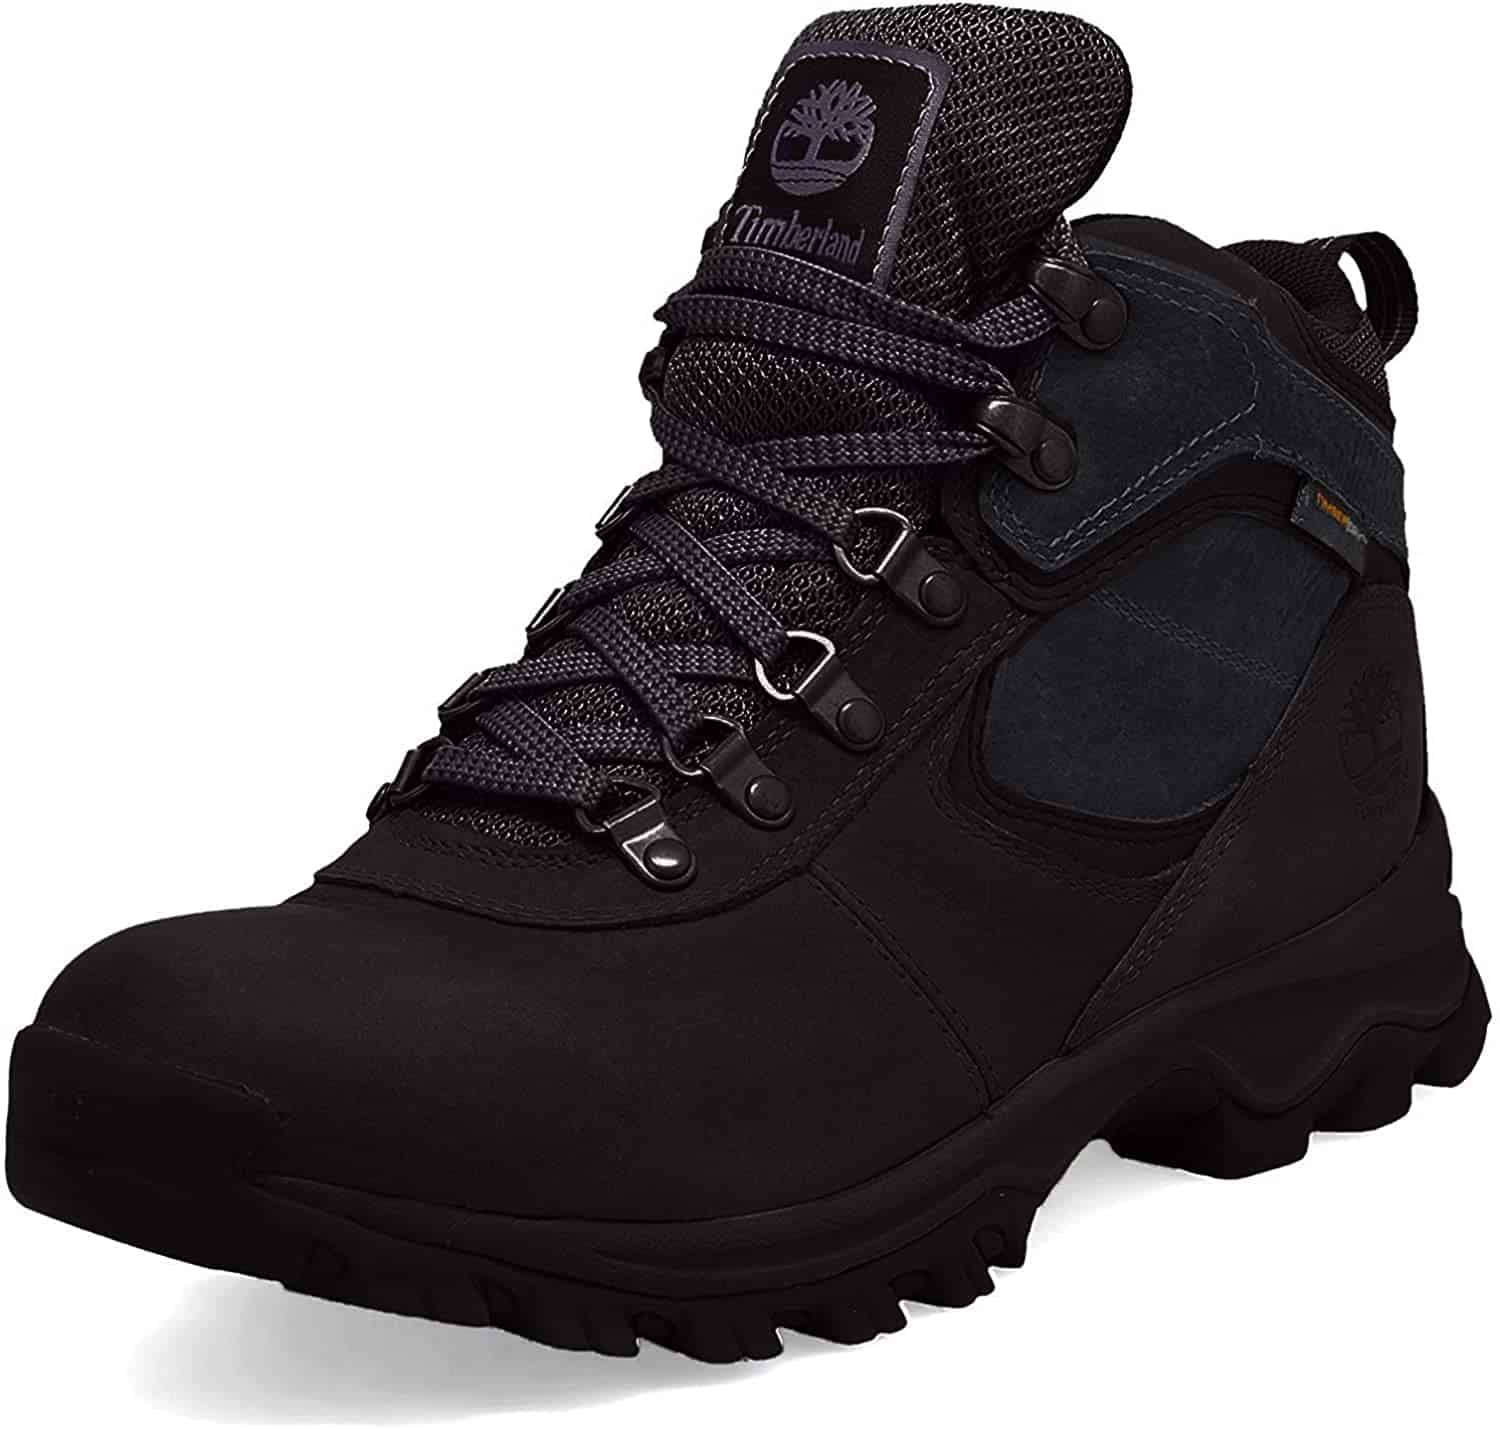 Timberland Men's Mt. Maddsen Mid Leather Wp Hiking Boot